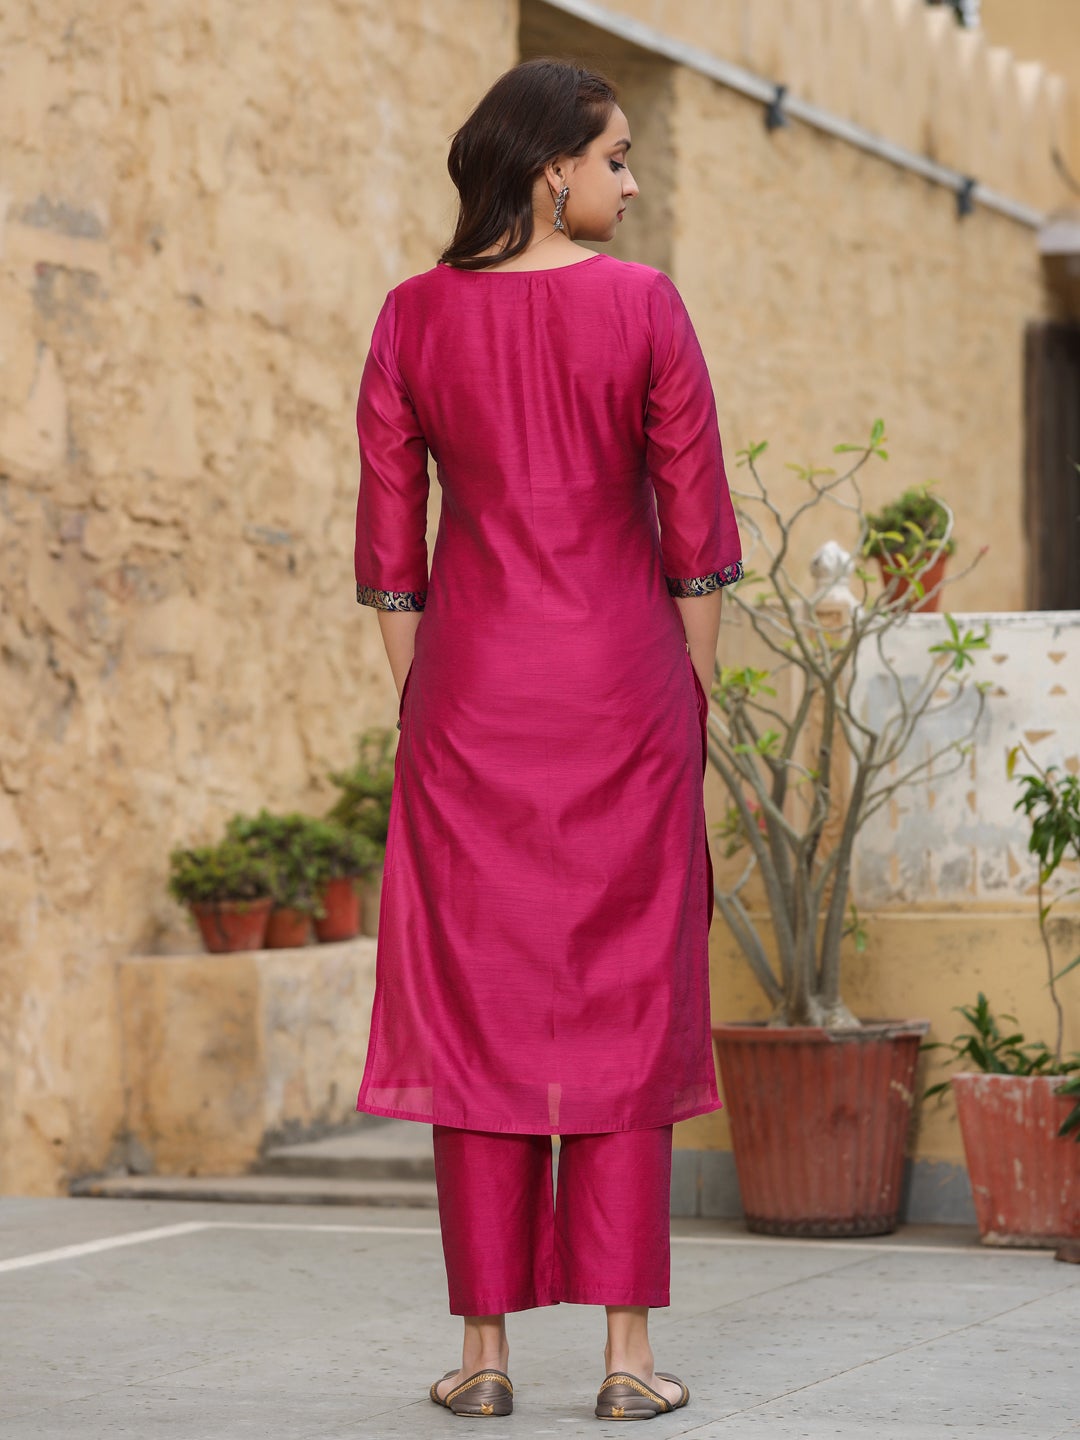 Shop Solid Brocade Yoke Straight Kurta with Pants Online at Jaipur Kurti. Shop Classic Embroidery Ddesigned Clothes for Women Perfect for all special occasions